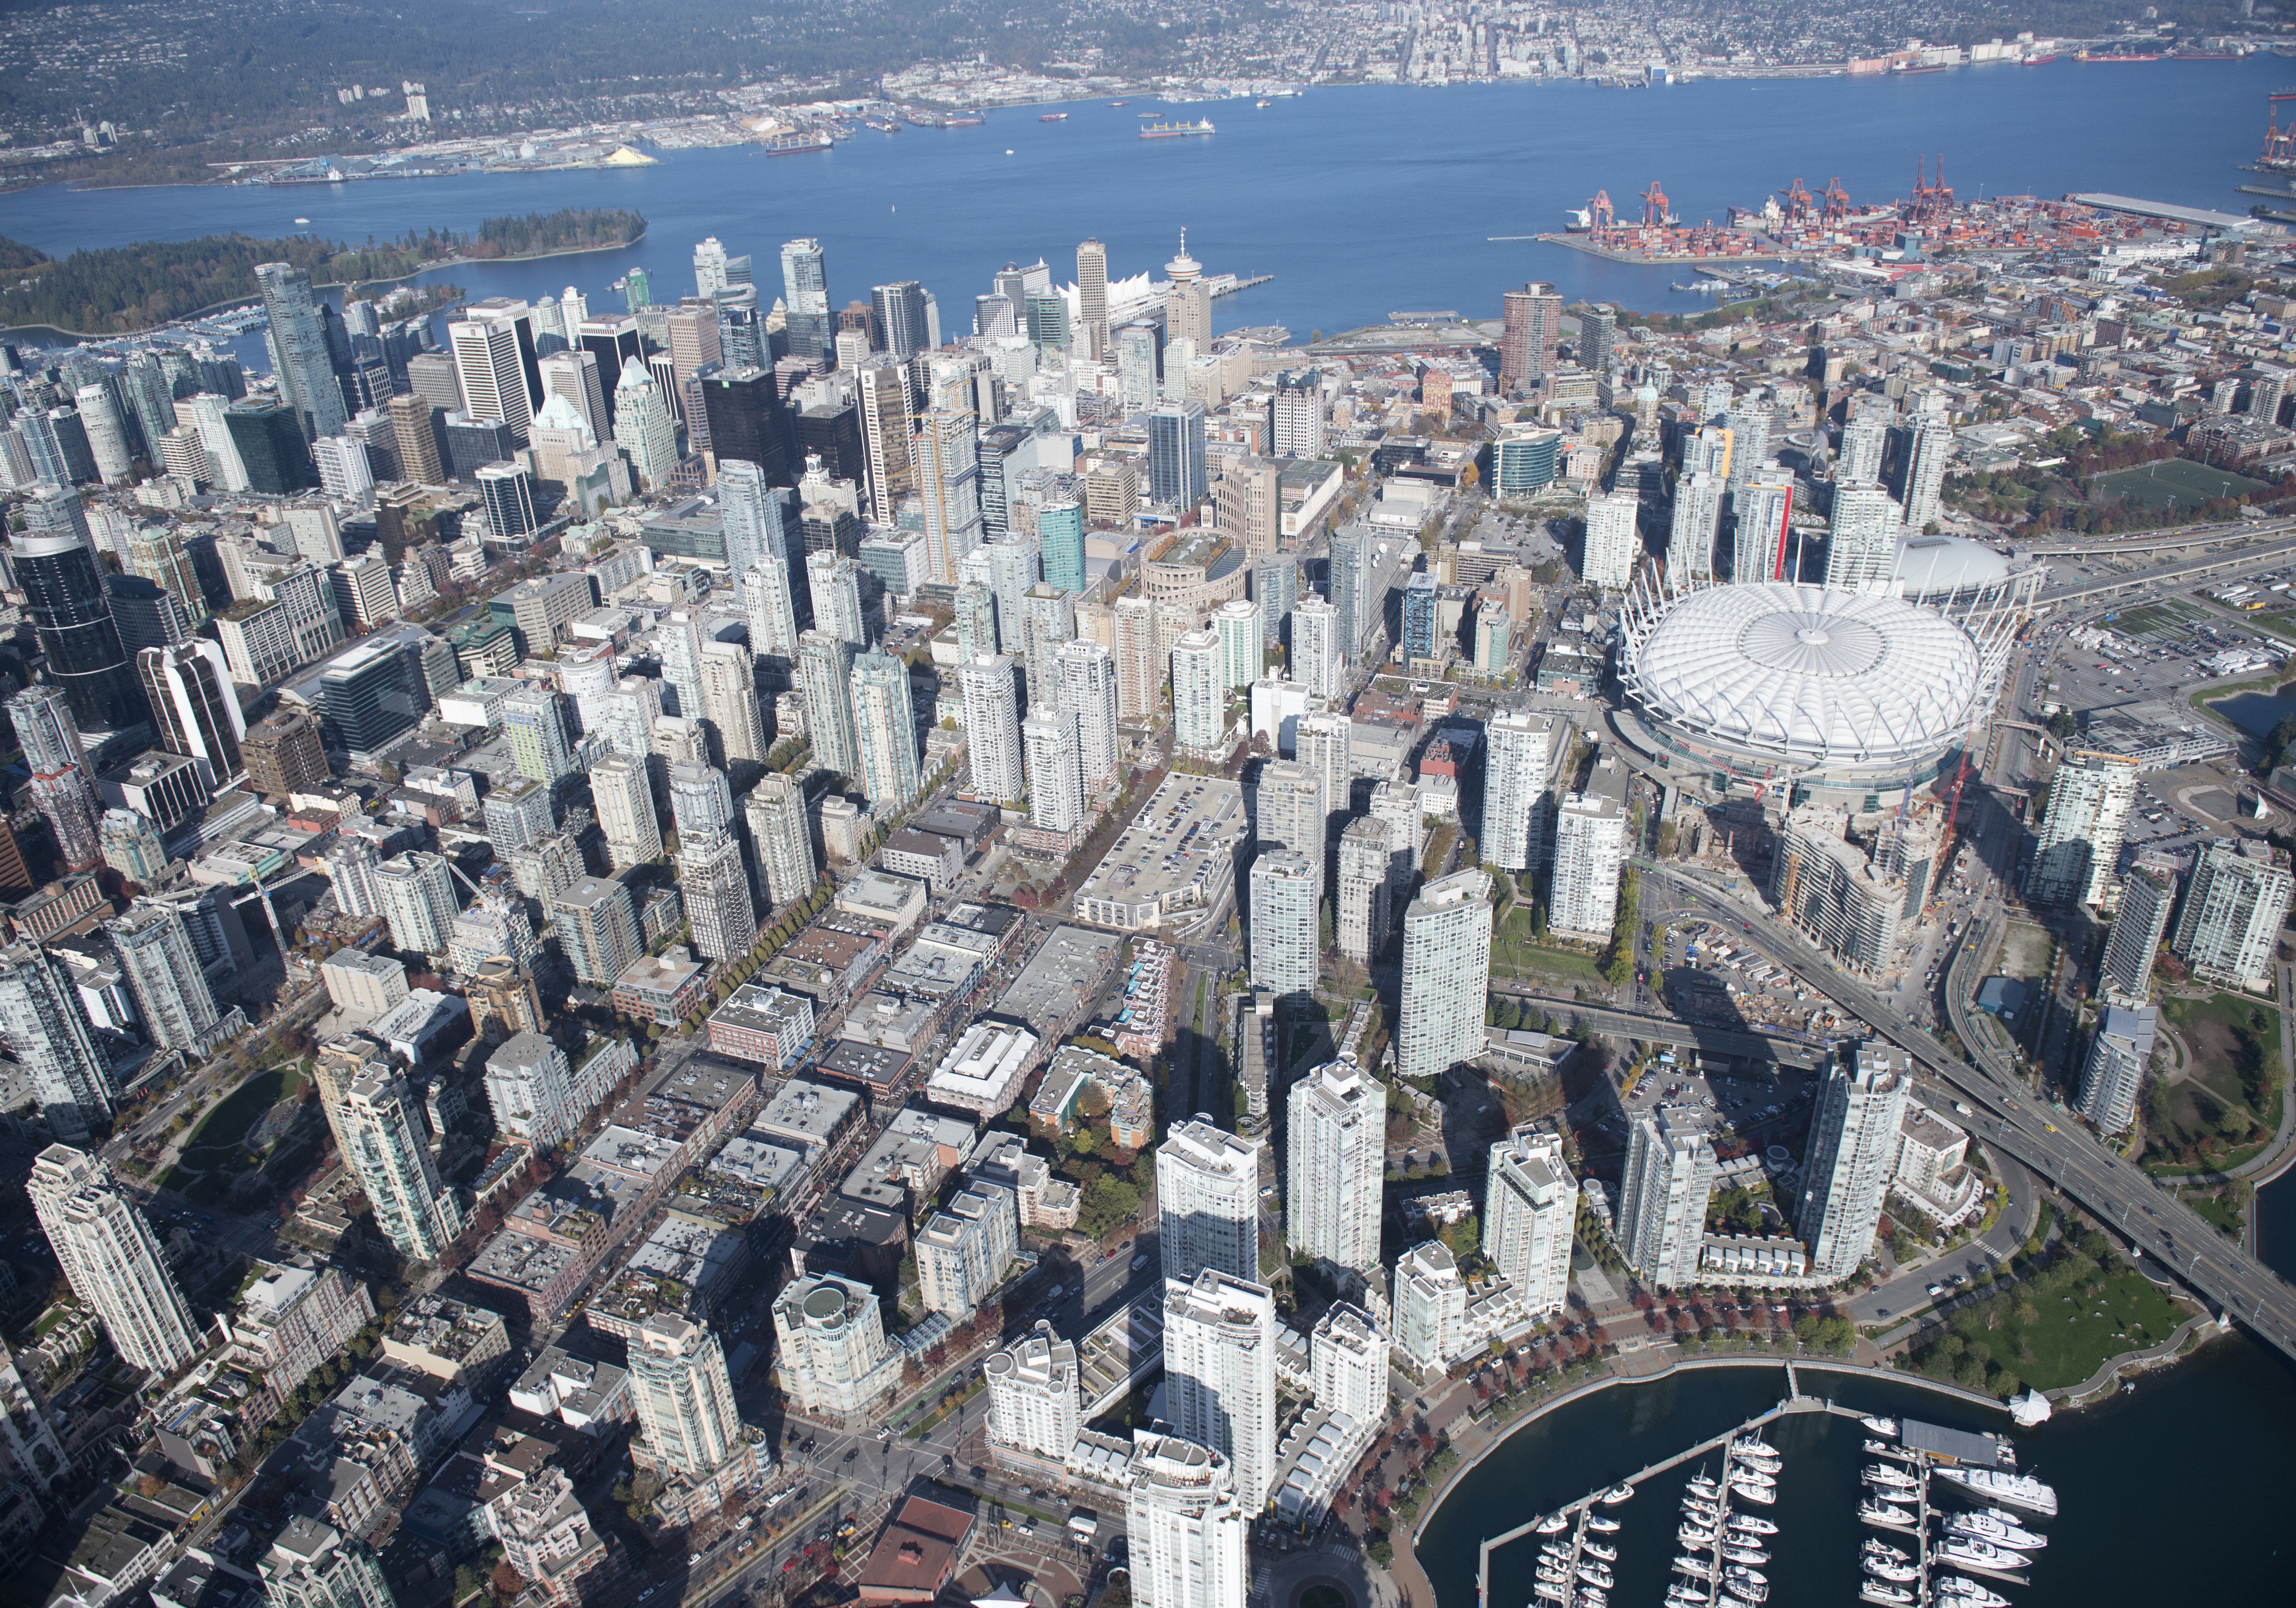 Ariel view of downtown Vancouver - Picture of the Day #12